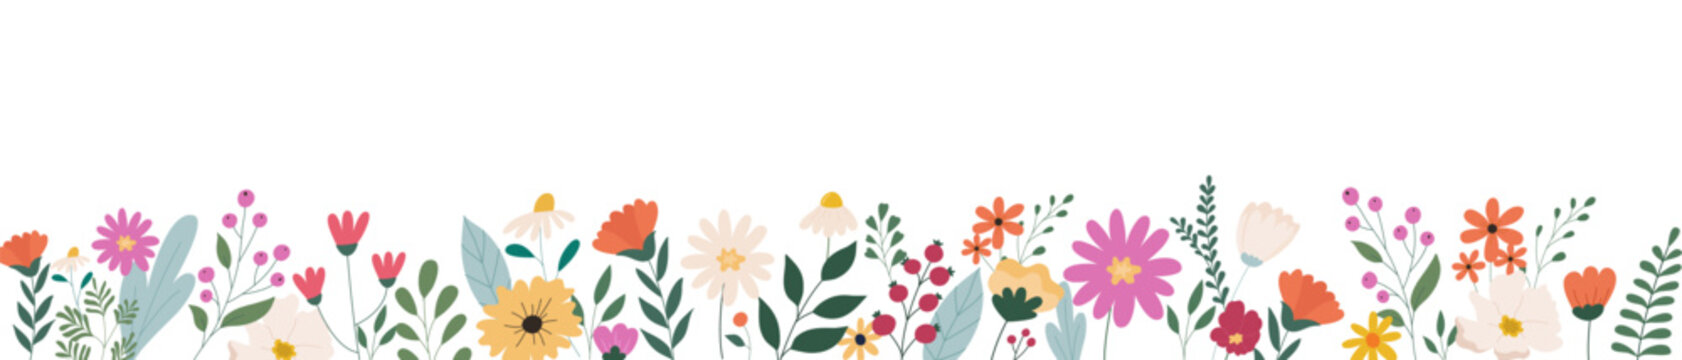 Horizontal white banner or background with beautiful colorful flowers and leaves. Spring botanical flat vector illustration on white background for wallpapers, banners, flyers, invitations, posters